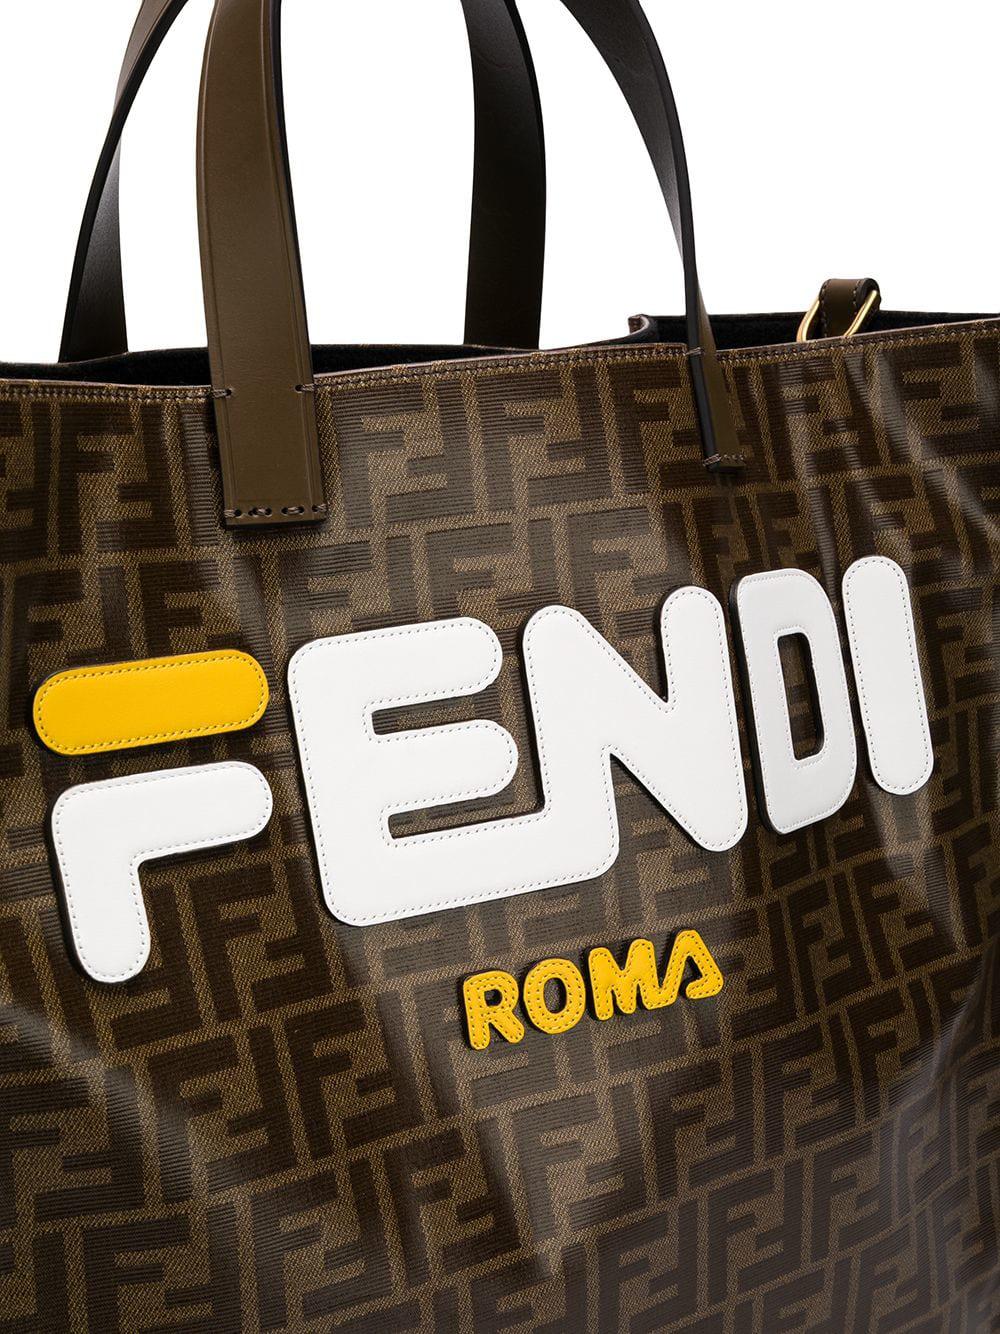 Fendi Leather Mania Brown And White Large Logo Print Tote Bag - Lyst